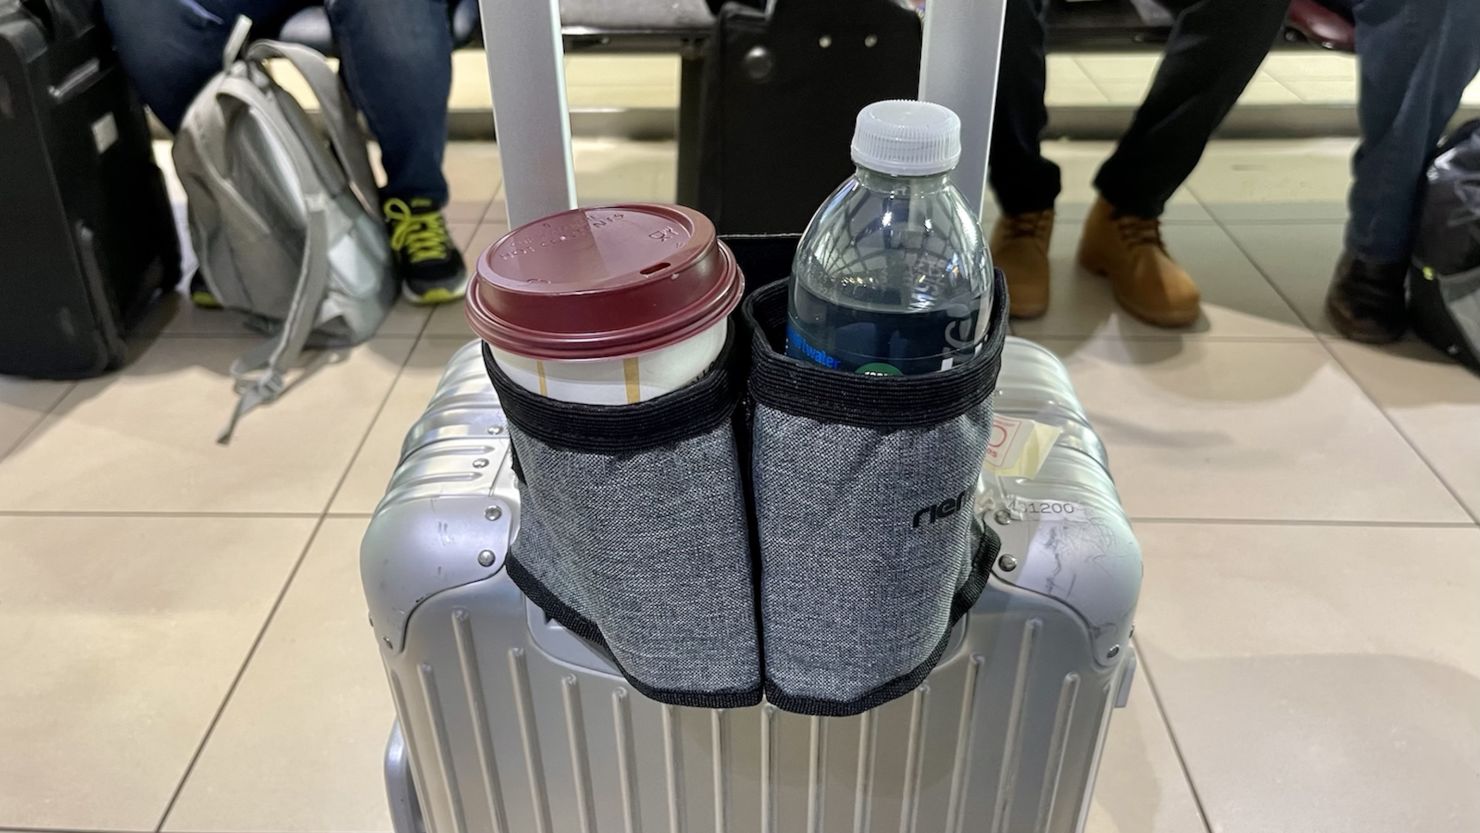 Luggage Travel Cup Holder X-Protector - Black Suitcase Cup Holder